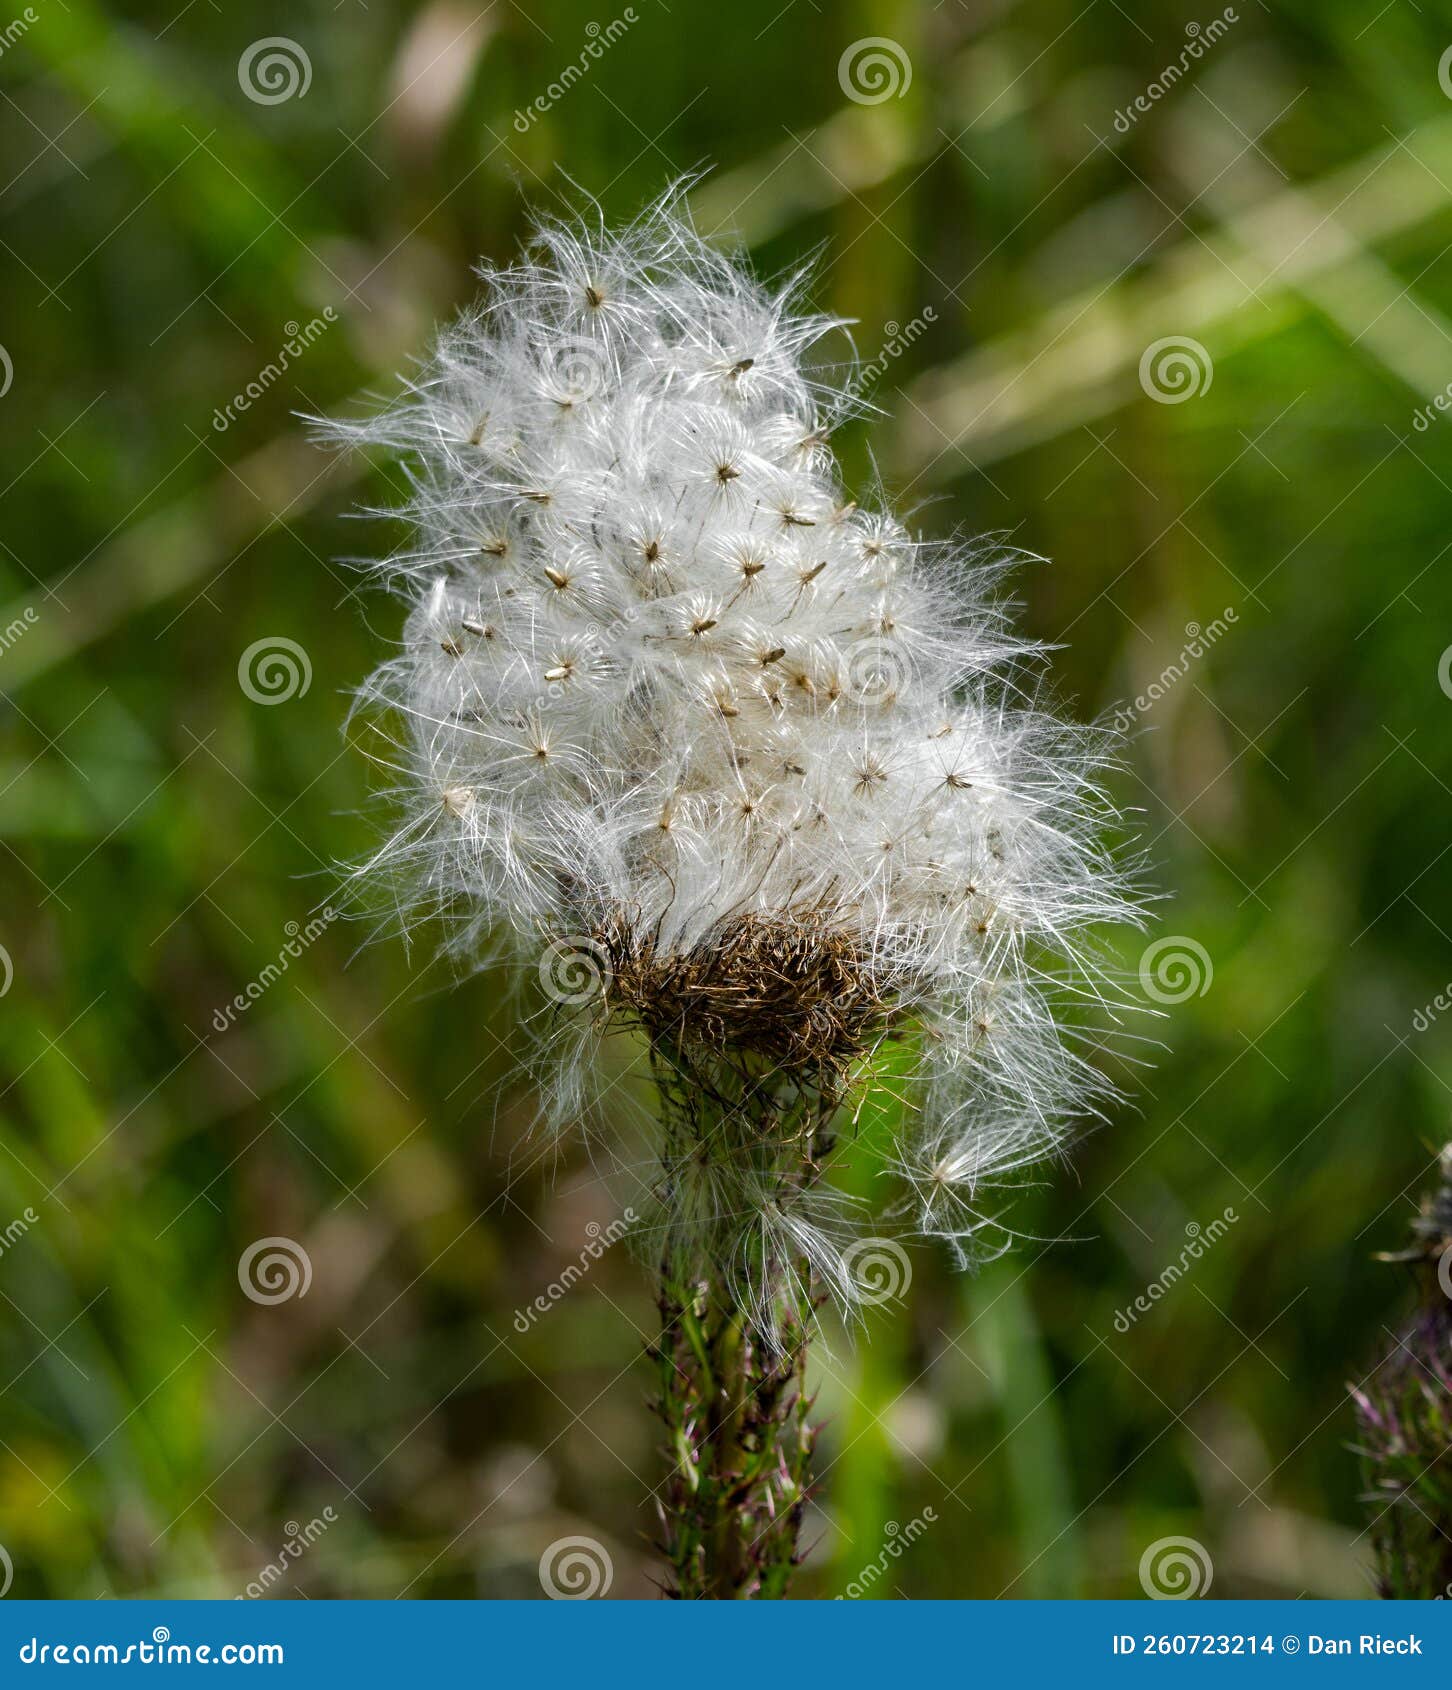 Collection 99+ Images thistle white fluffy things floating in the air Excellent